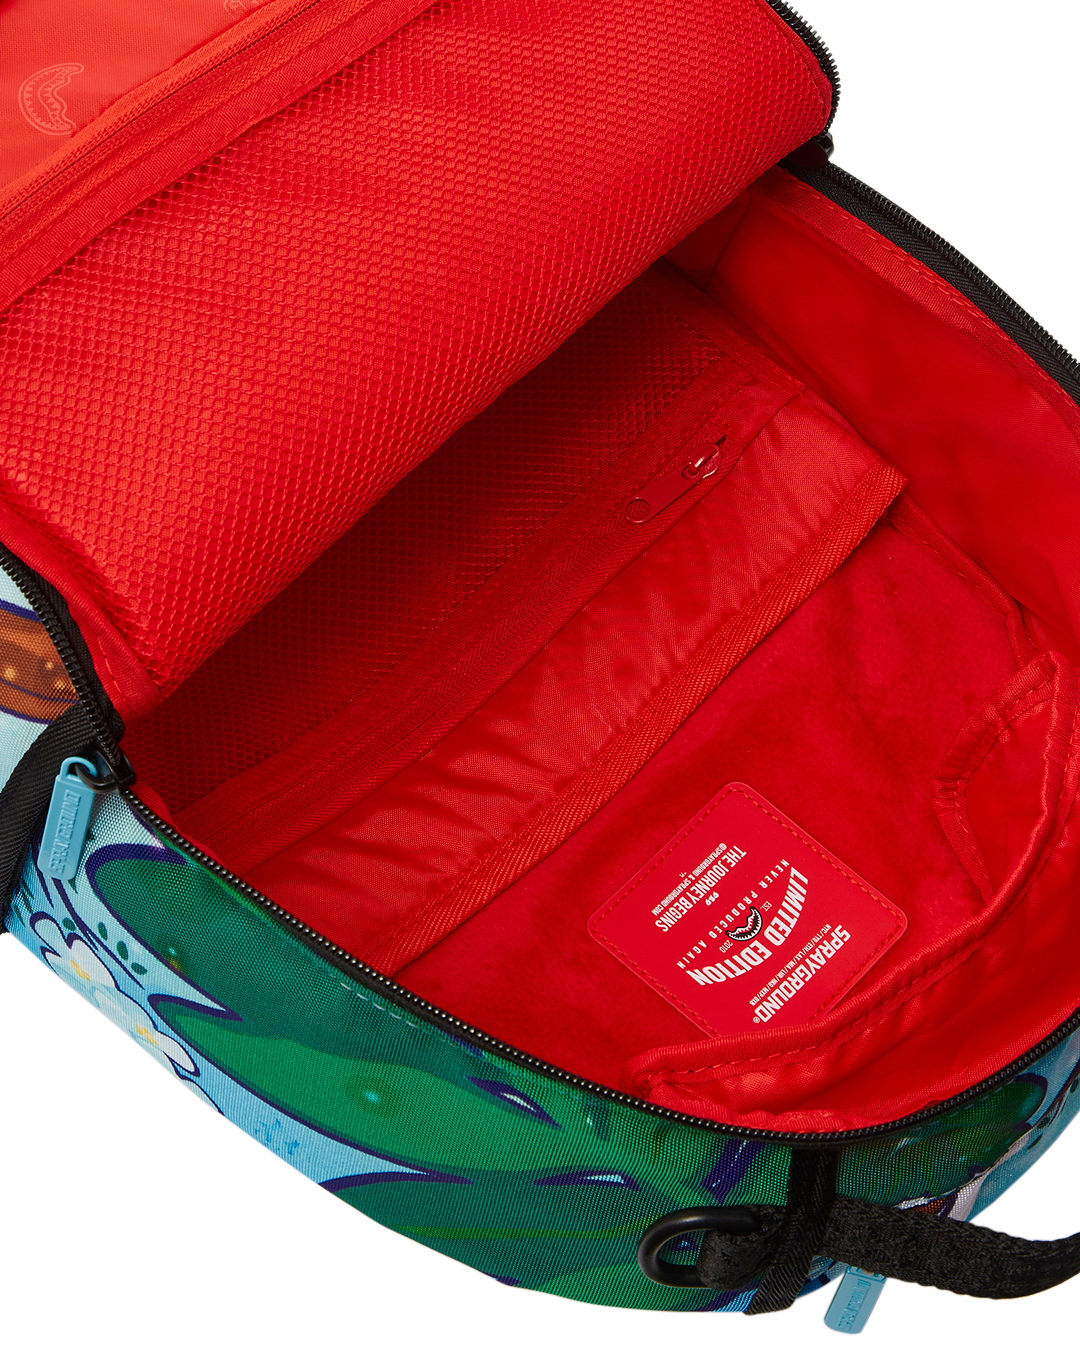 SPRAYGROUND JOLLY RANCHER Green Translucent Backpack - Limited Edition